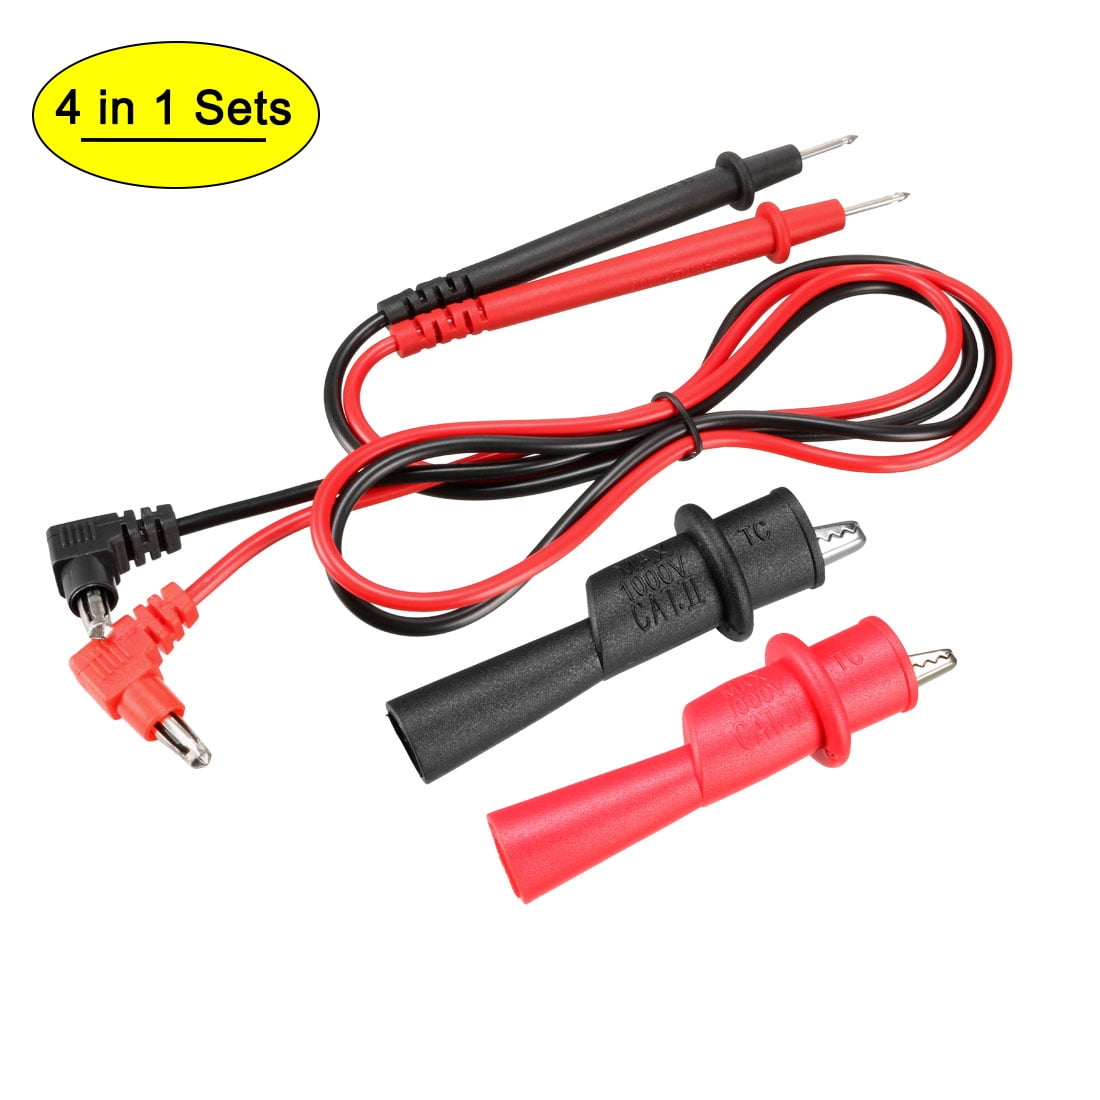 1 Pair Banana Plug To Test Hook Clip Probe Lead Cable For Multimeter new 